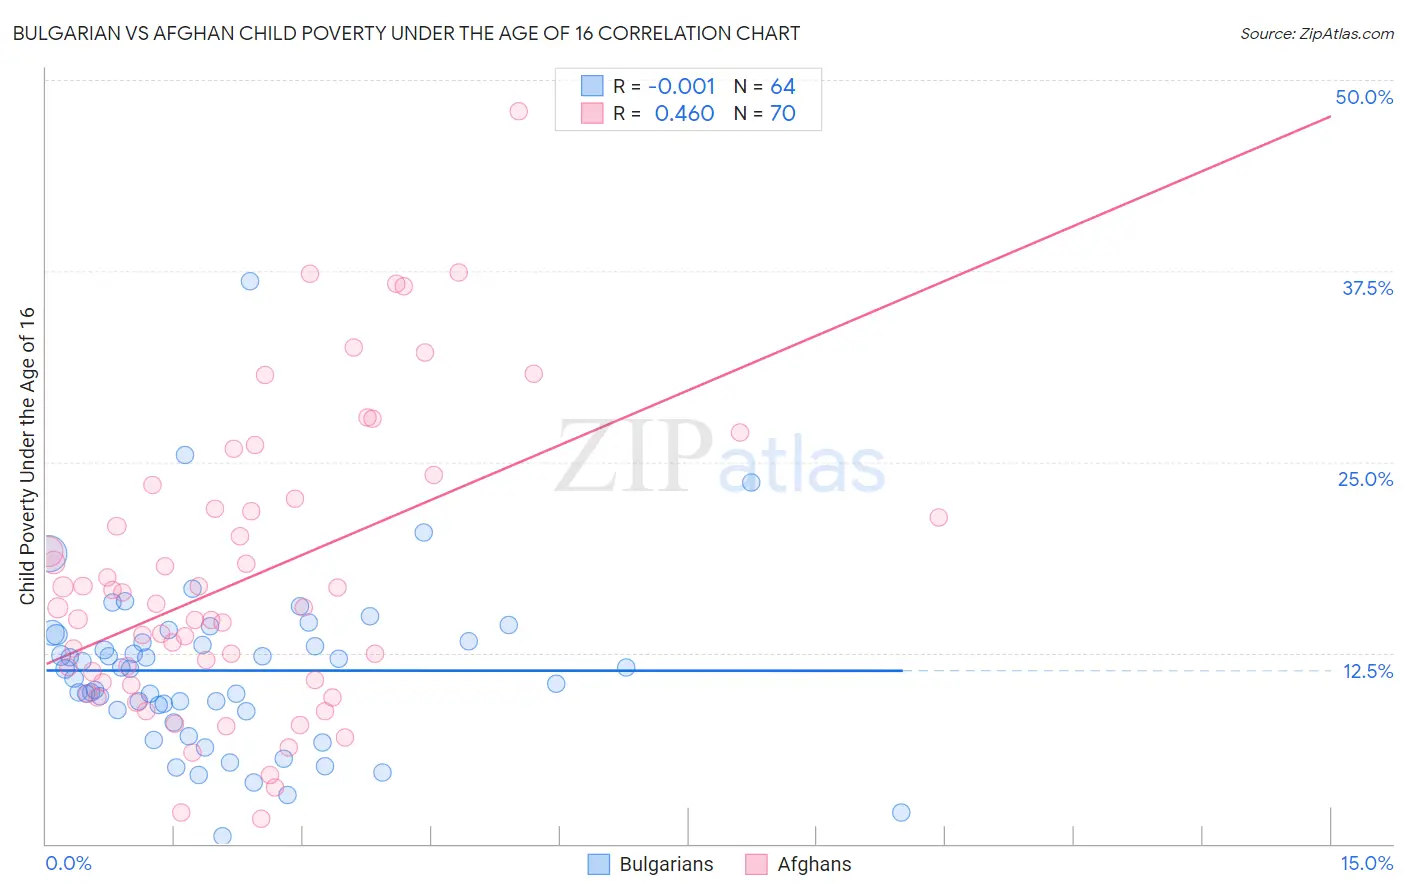 Bulgarian vs Afghan Child Poverty Under the Age of 16